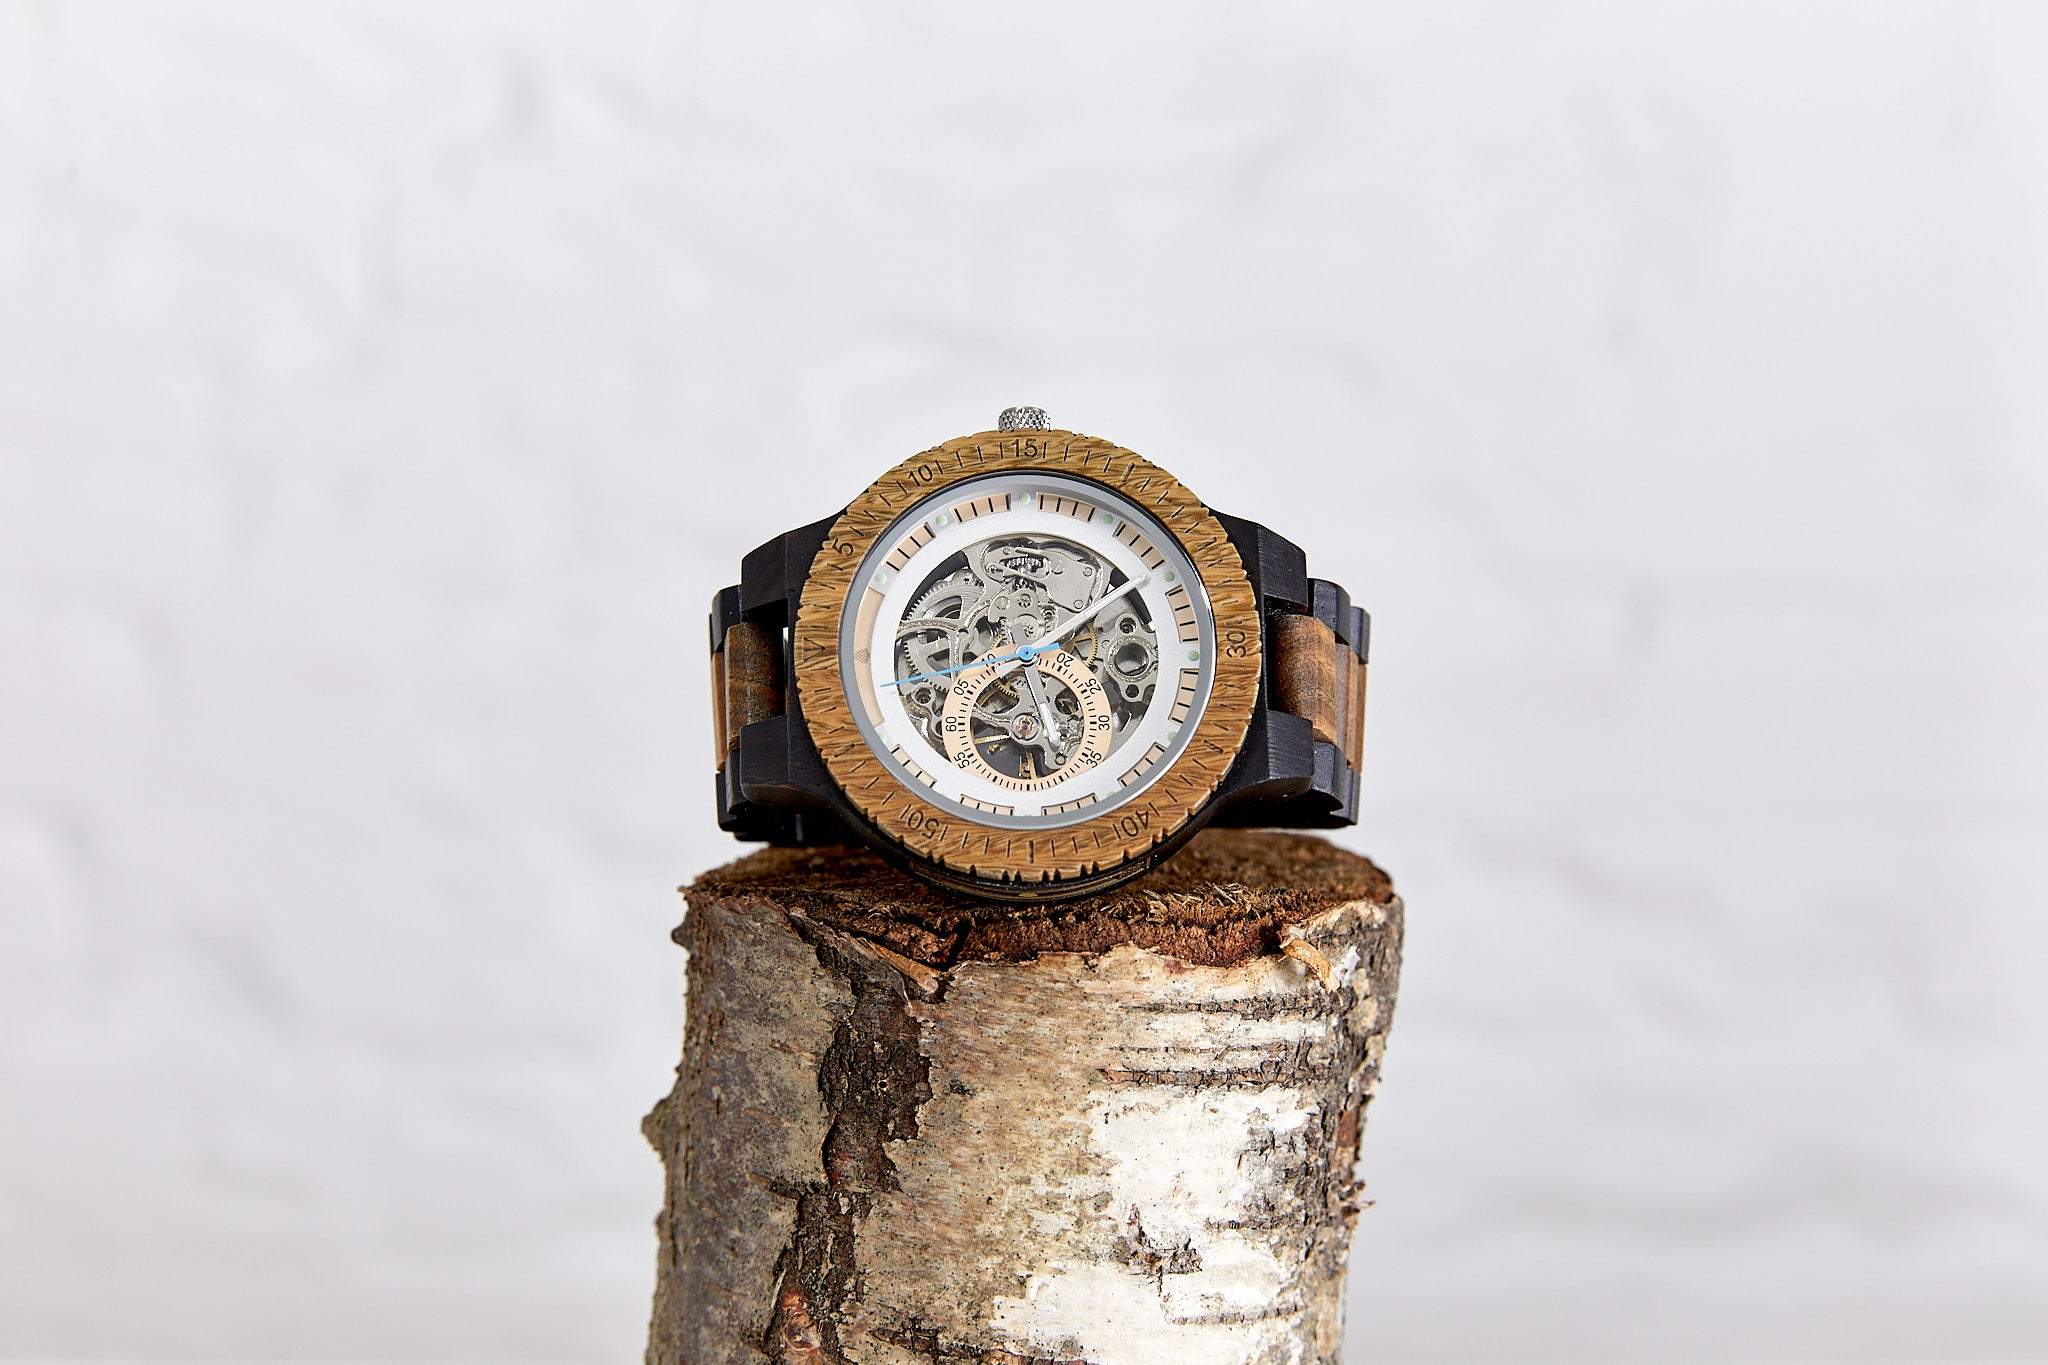 The Hemlock Sustainable natural wood wristwatch made from recycled wood by The Sustainable Watch Company placed on a log for display